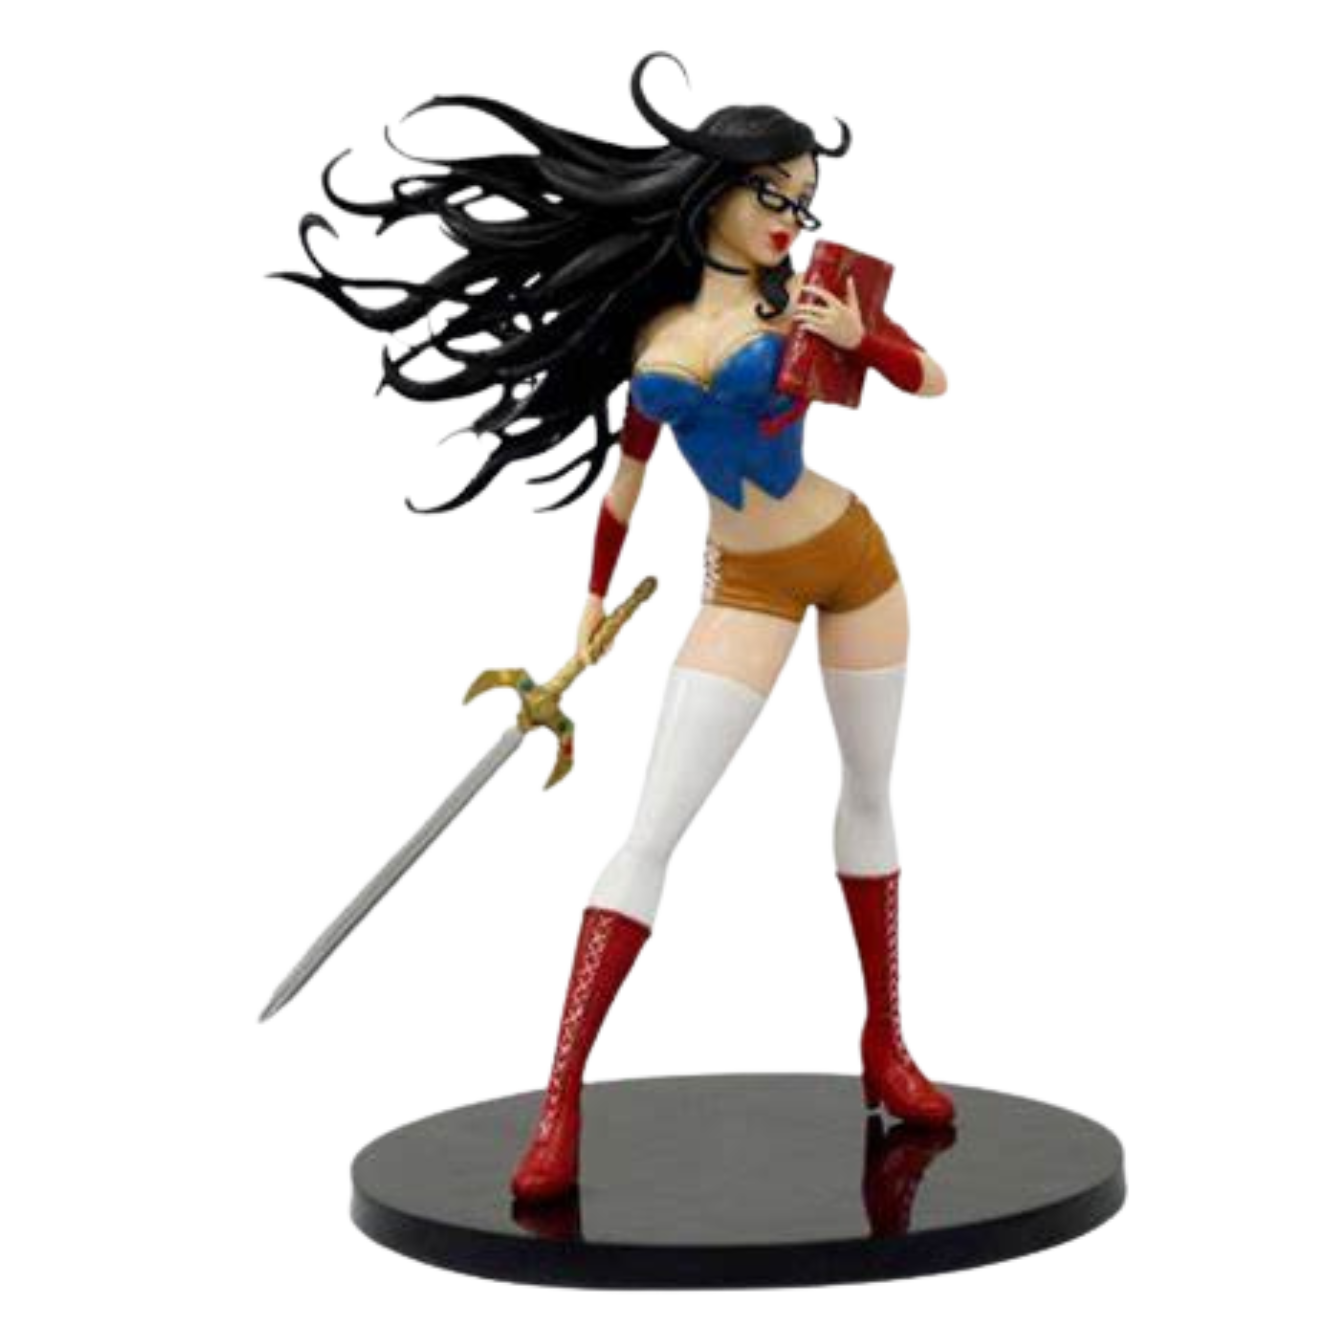 Sela Mathers (Snow White) Statue by Zenescope Entertainment